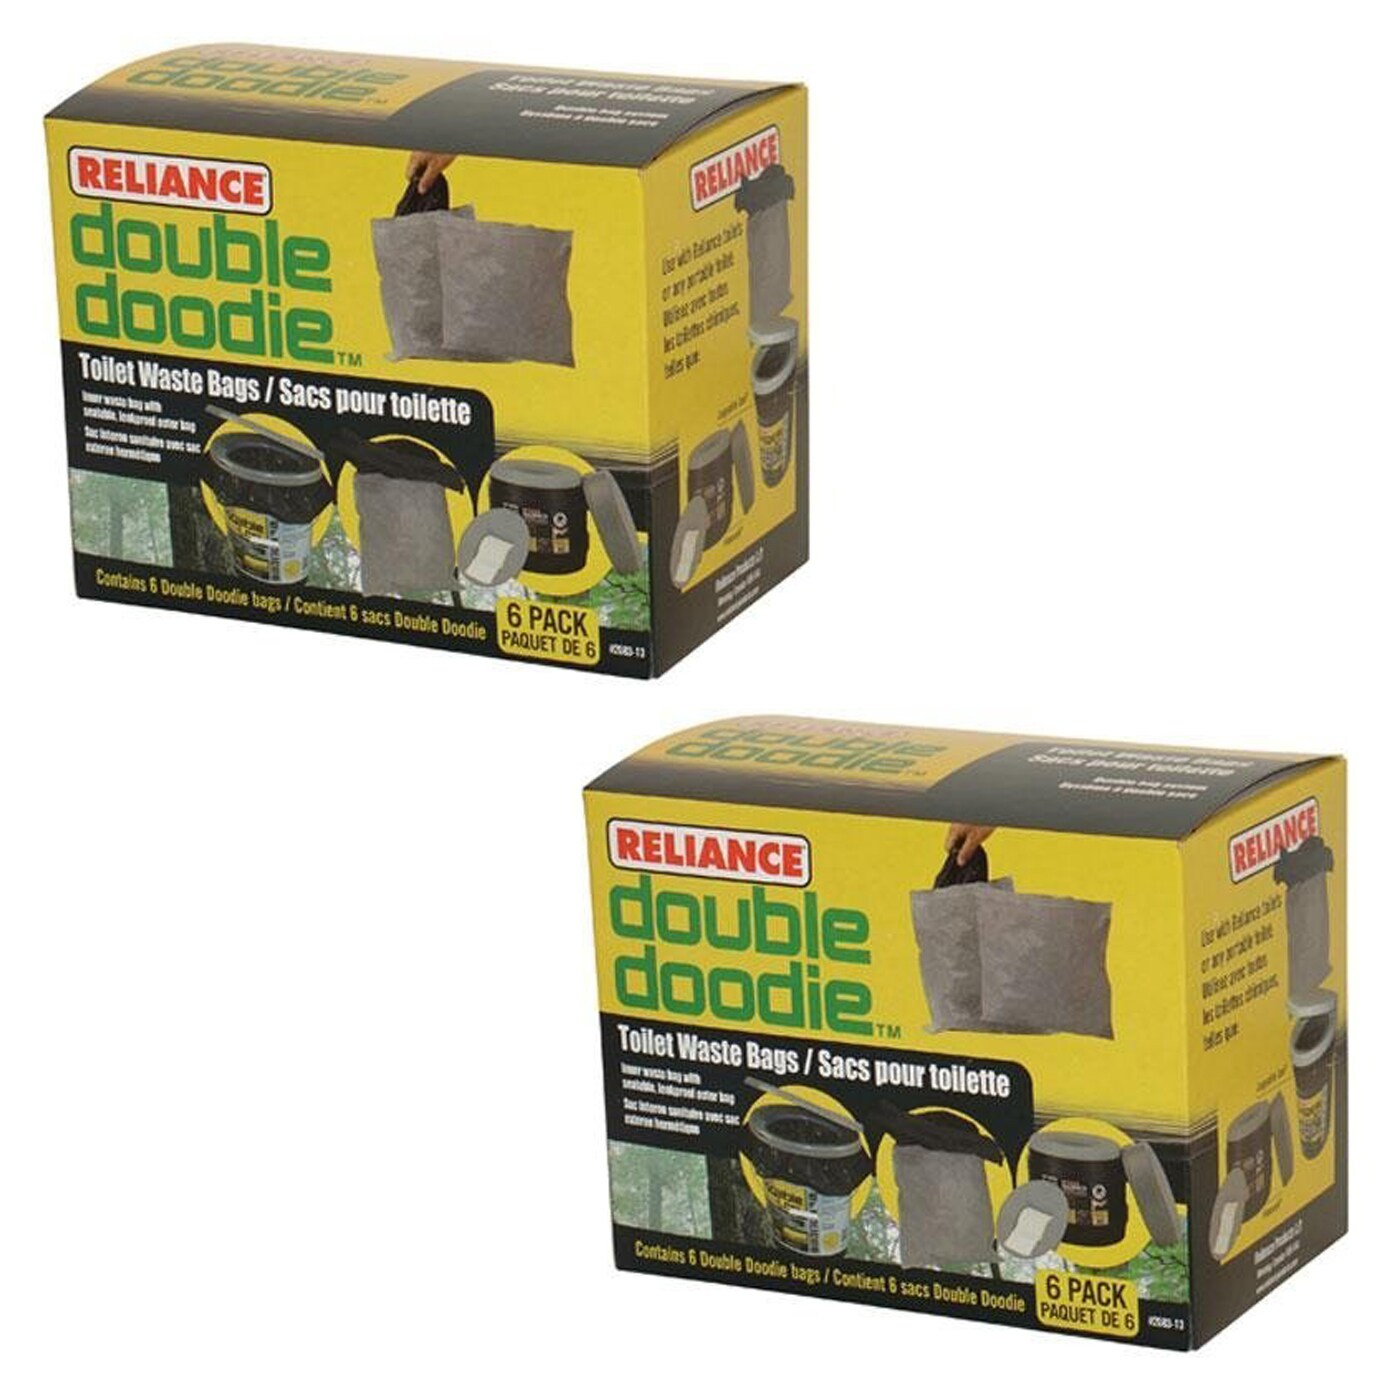 Reliance Products Double Doodie Toilet Waste Bags 6pack for sale online 